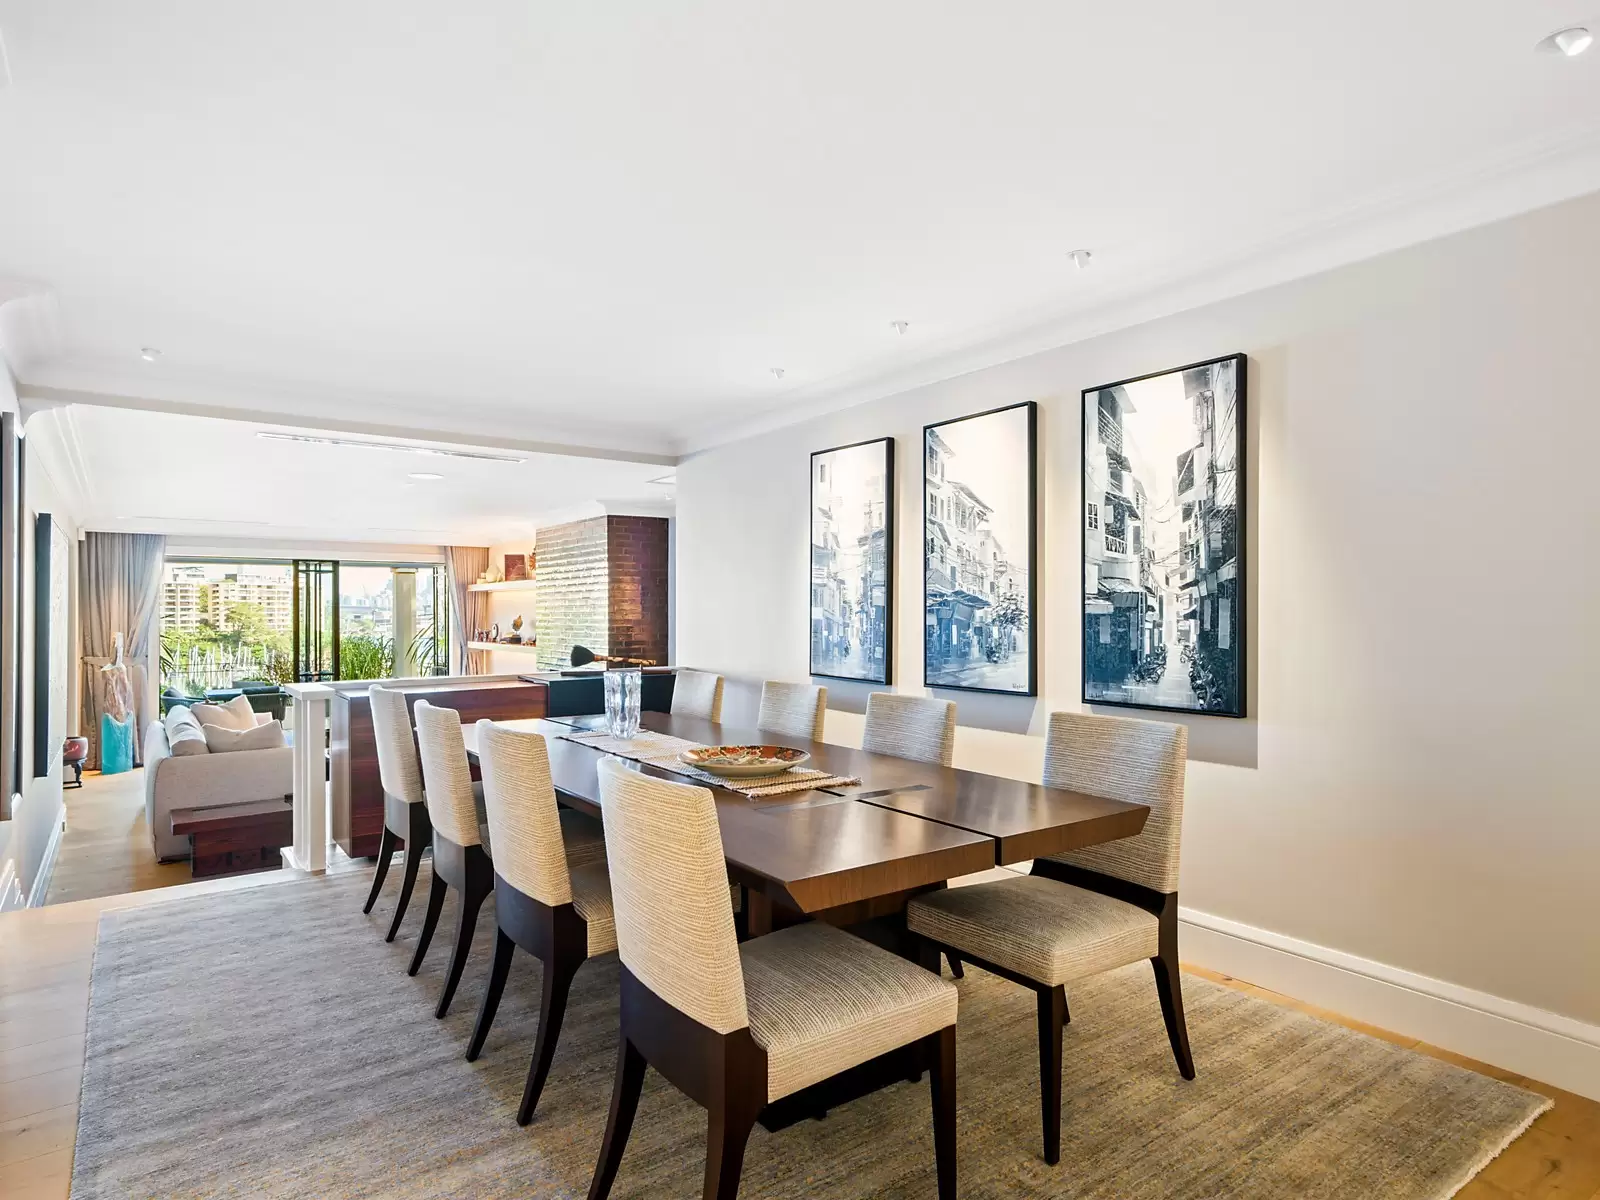 Photo #14: 1/40-42 Mona Road, Darling Point - Sold by Sydney Sotheby's International Realty